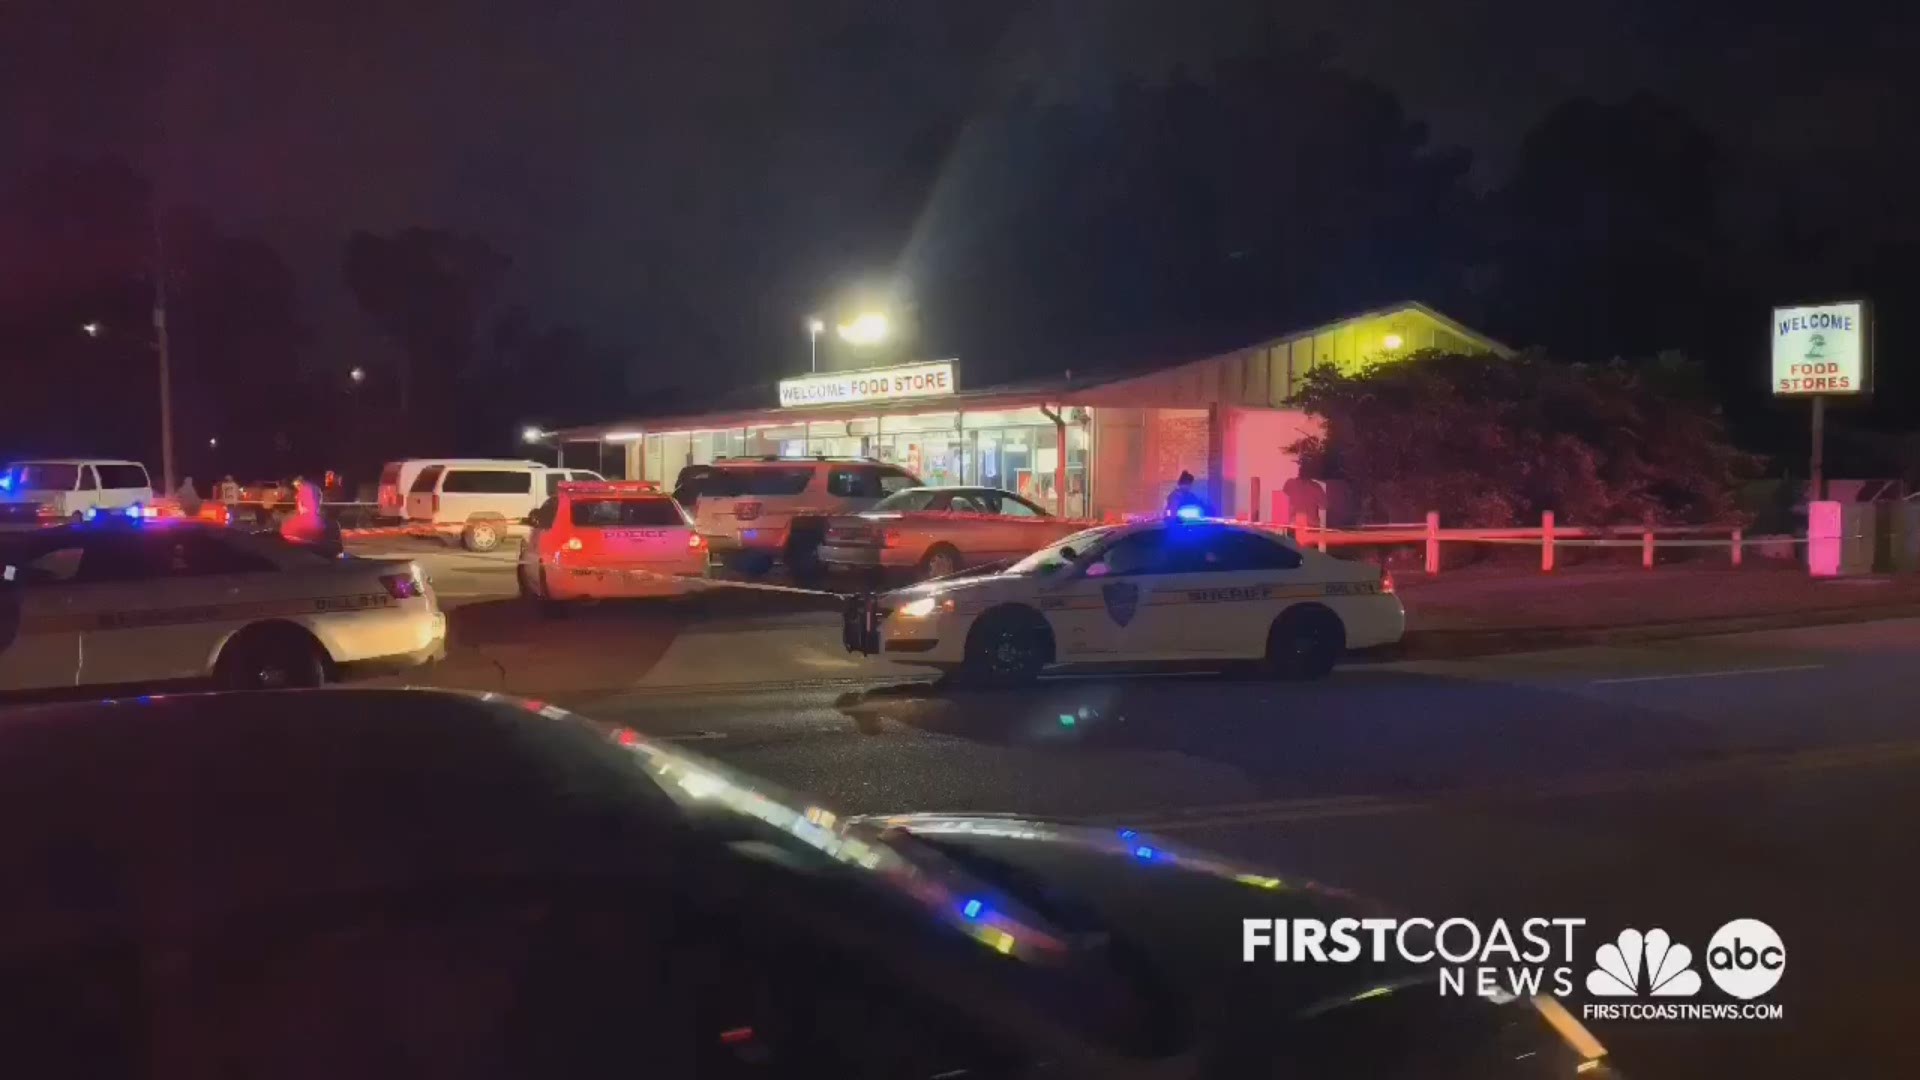 Viewers called First Coast News to ask about the police activity near Kennerly and Spring Glen Roads around 7:30 p.m. We reached out to JSO, who confirmed there was police activity but couldn't provide any details.